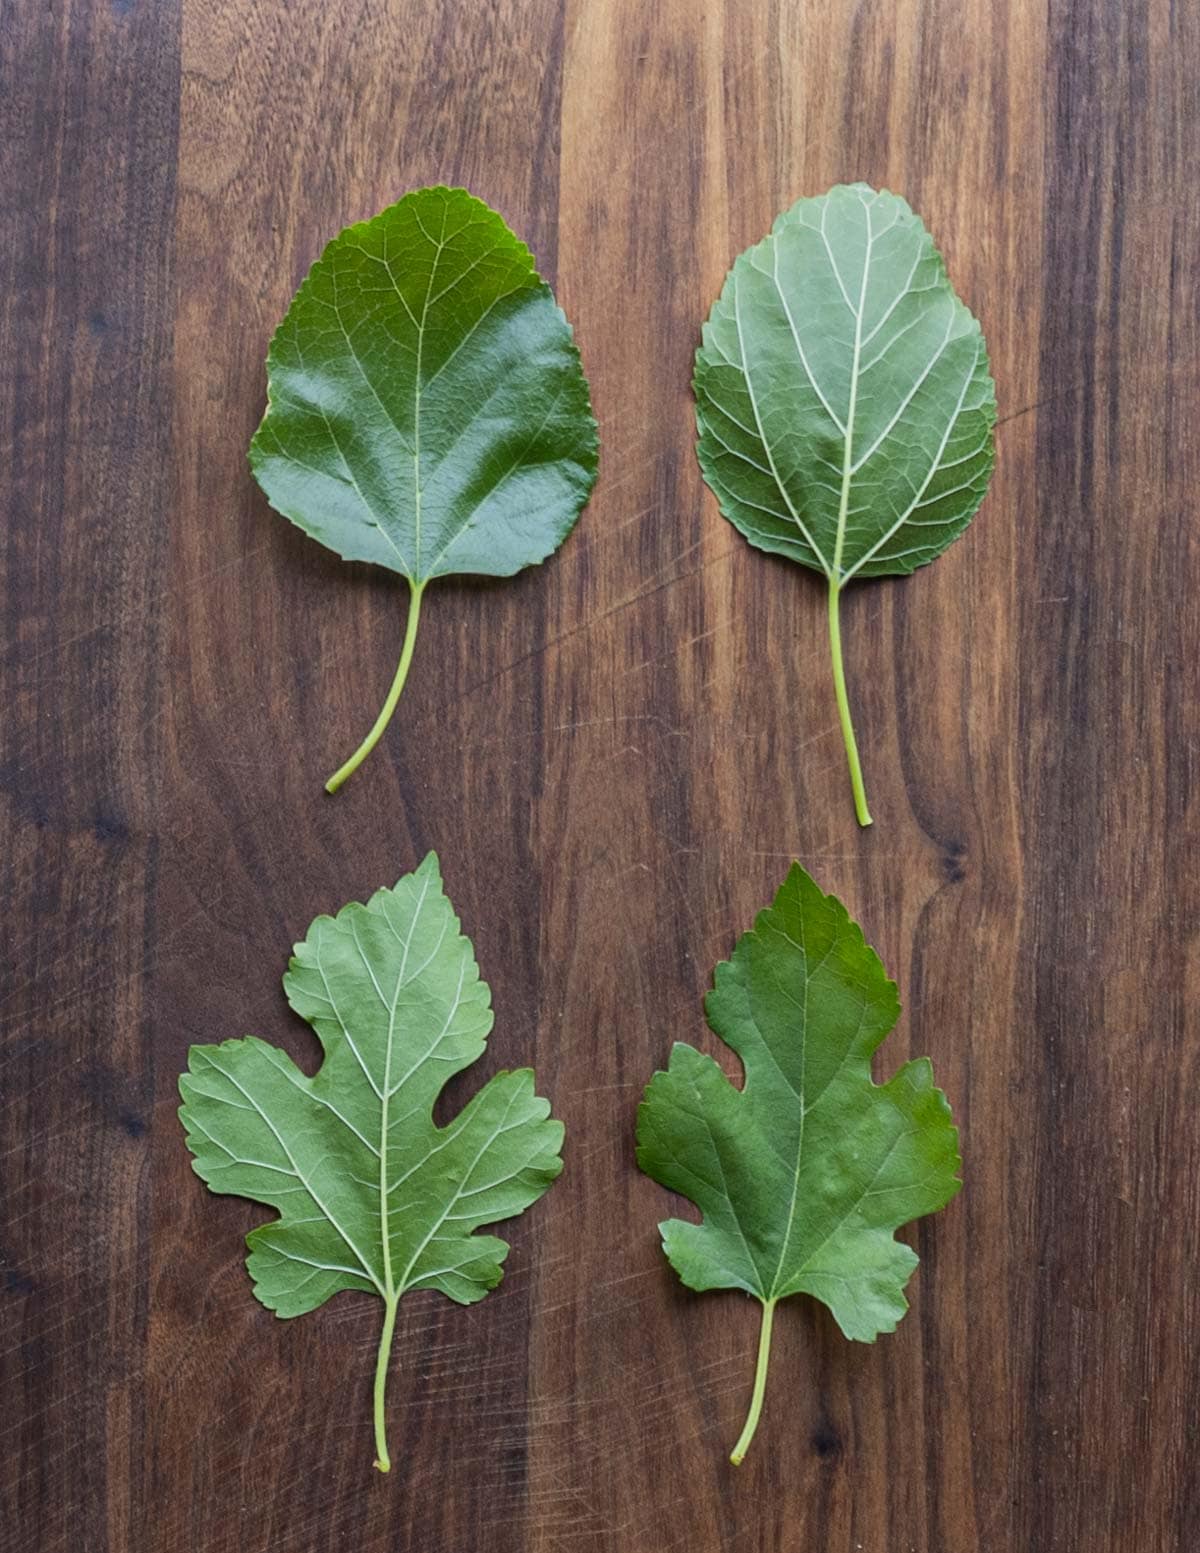 Two different shapes of white mulberry leaves (Morus alba).